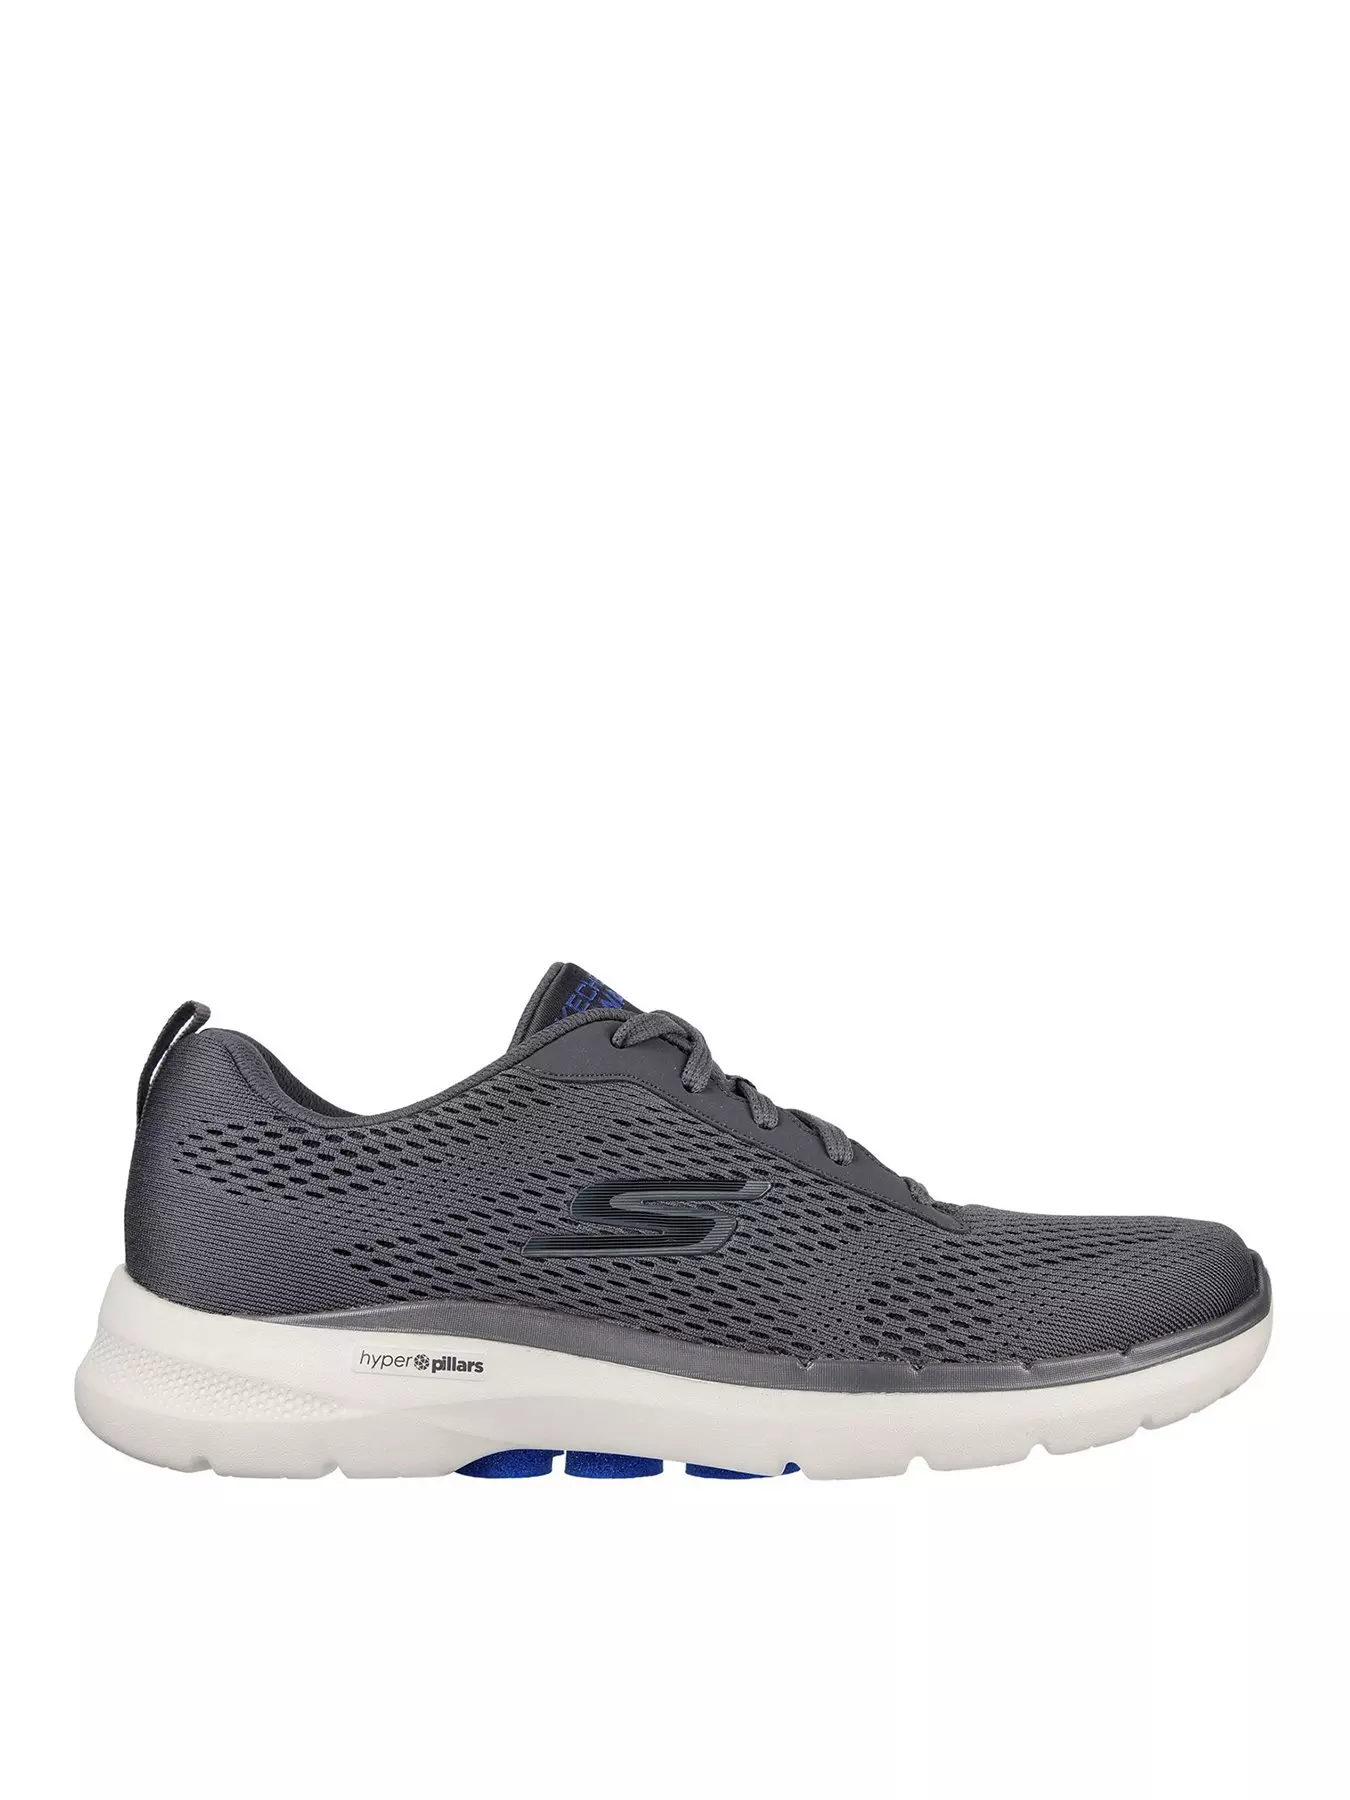 SKECHERS - SKECHERS Goodyear D'Lites 4 Sport Shoes Boost your style in  cushioned comfort Skechers D'Lites(R) 4.0 shoe. This lace-up sporty fashion  sneaker features a leather and synthetic upper with an Air-Cooled